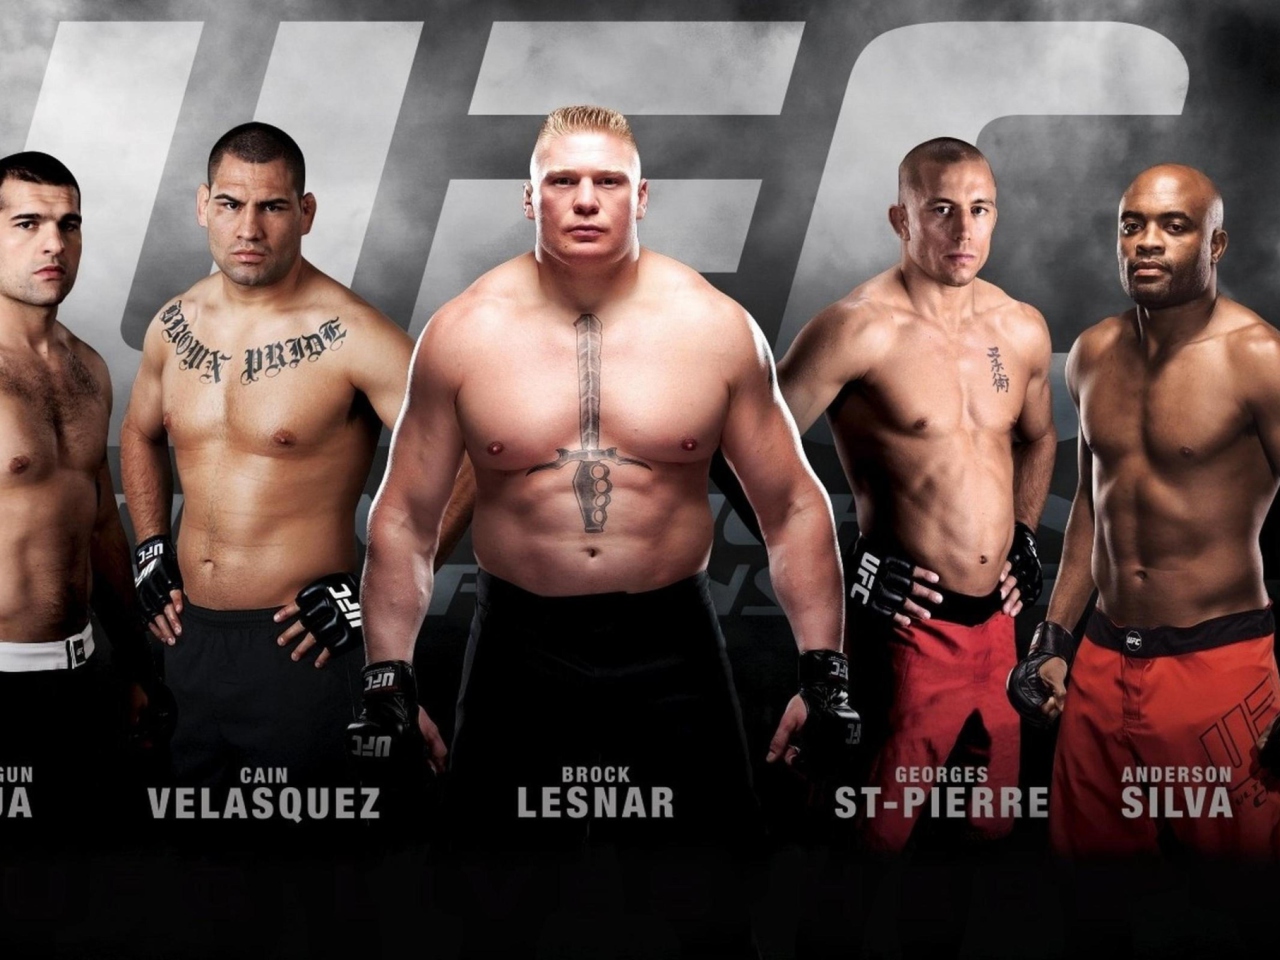 Ufc Mma Mixed Fighters wallpaper 1280x960